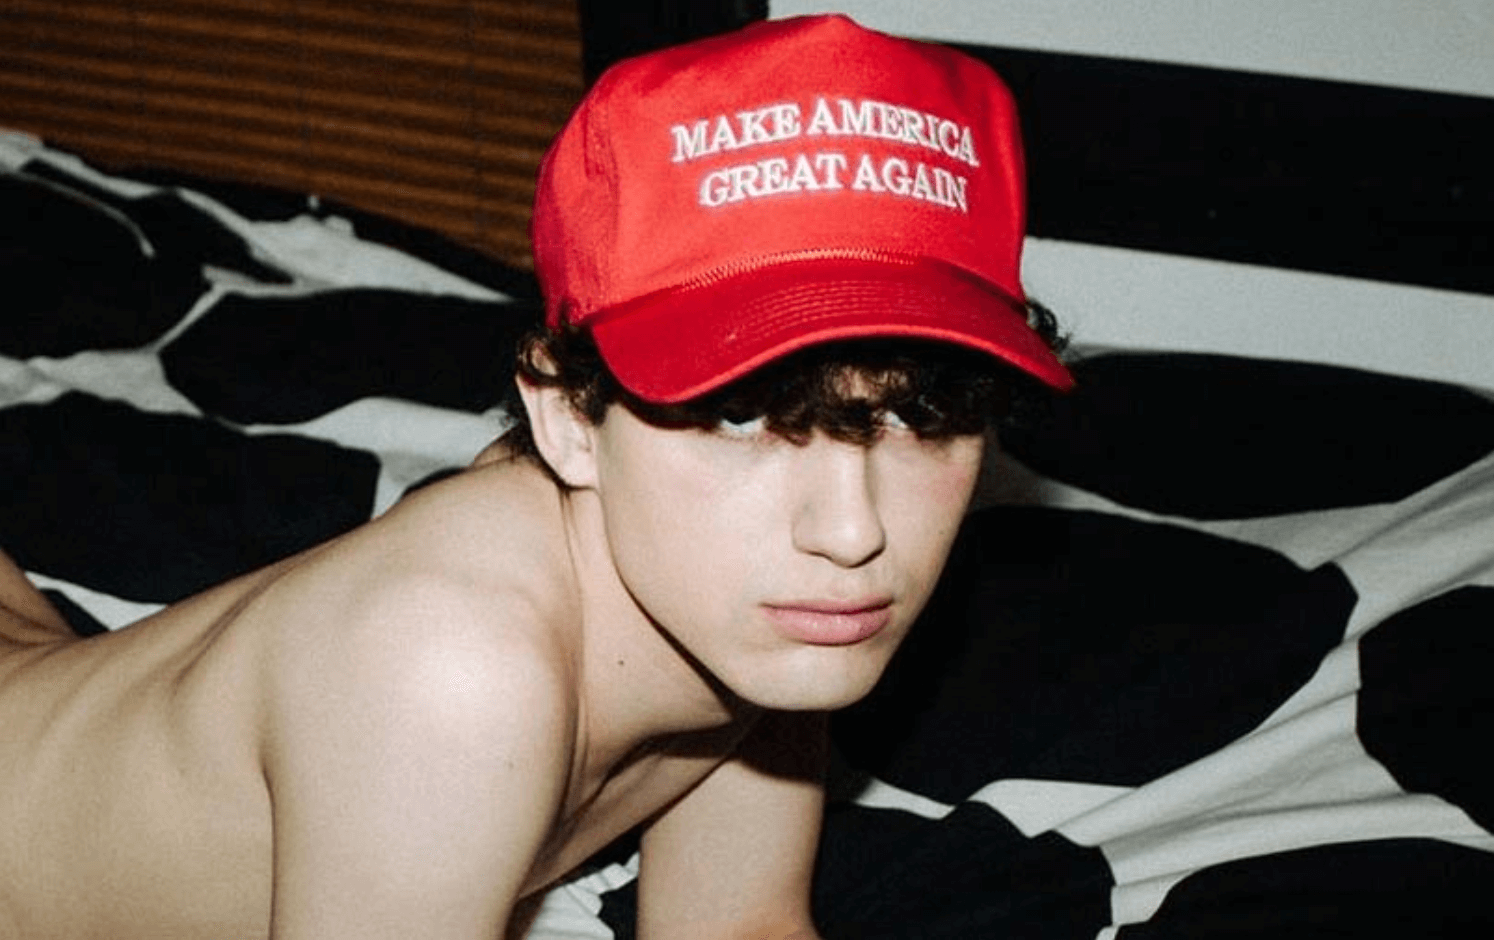 Twinks for Trump